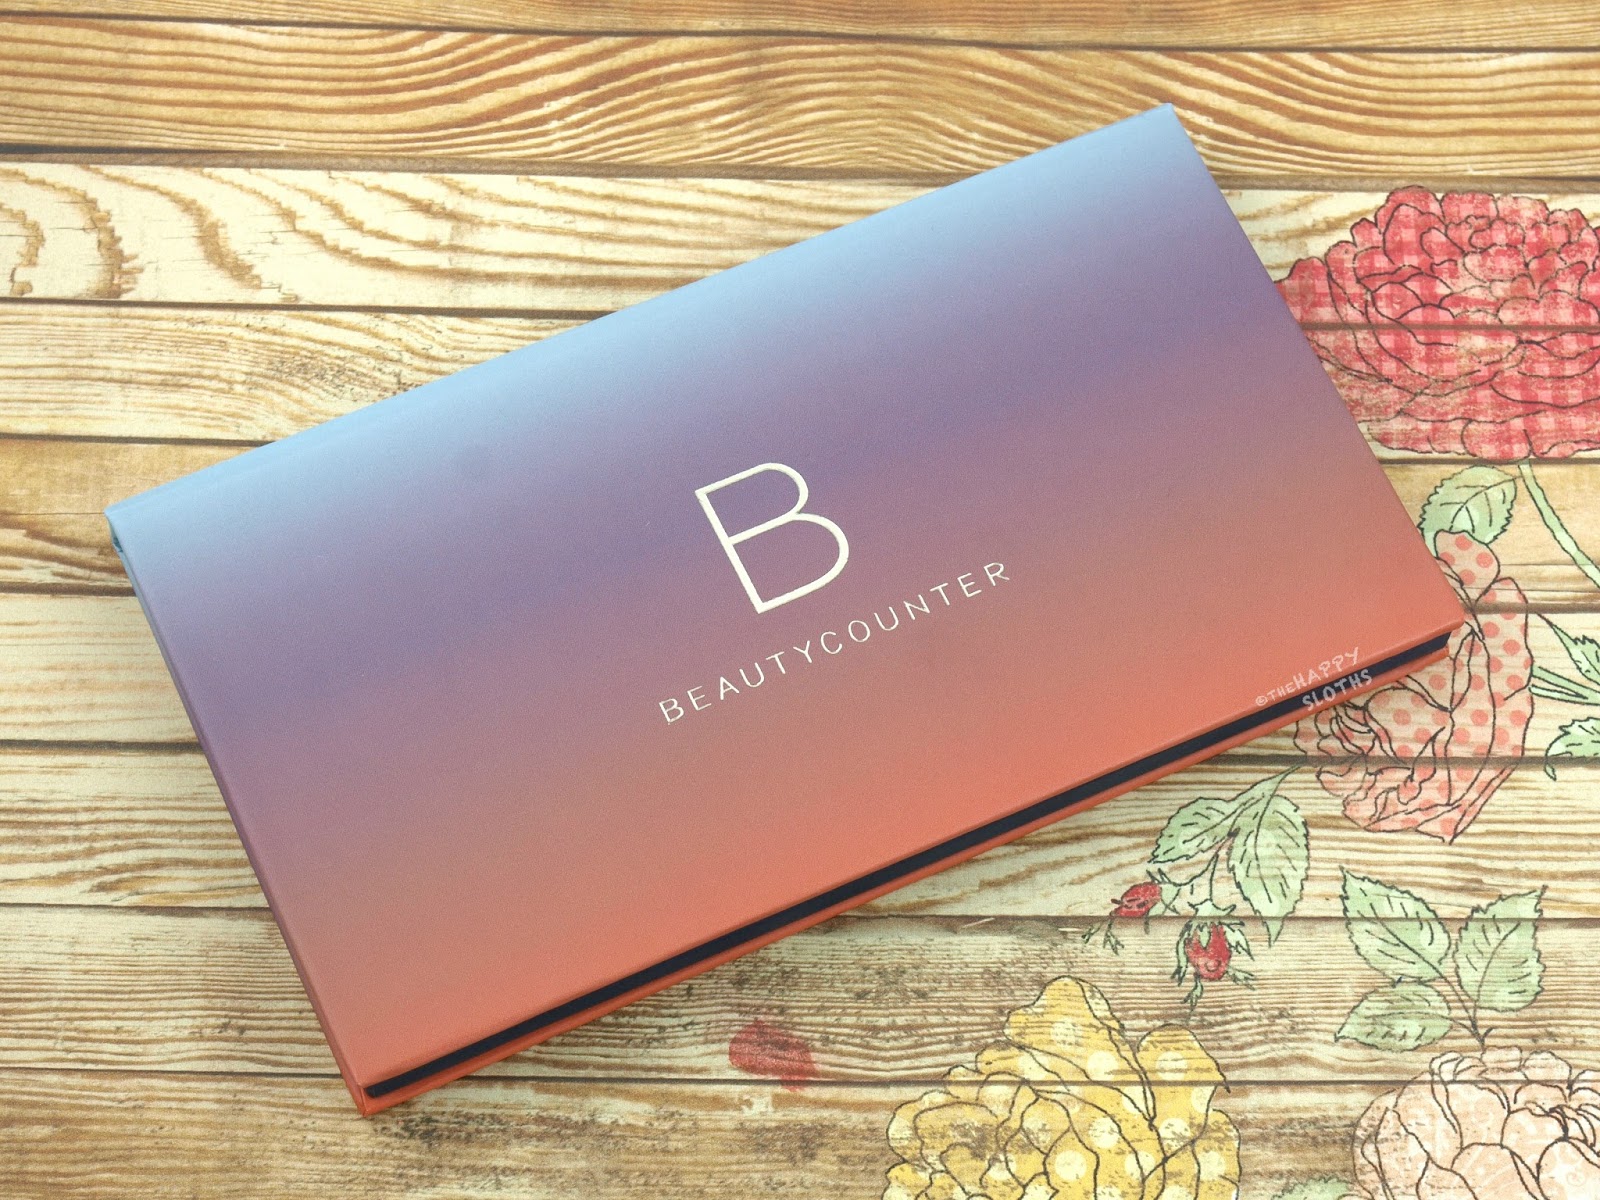 Beautycounter Desert Sunrise Palette: Review and Swatches